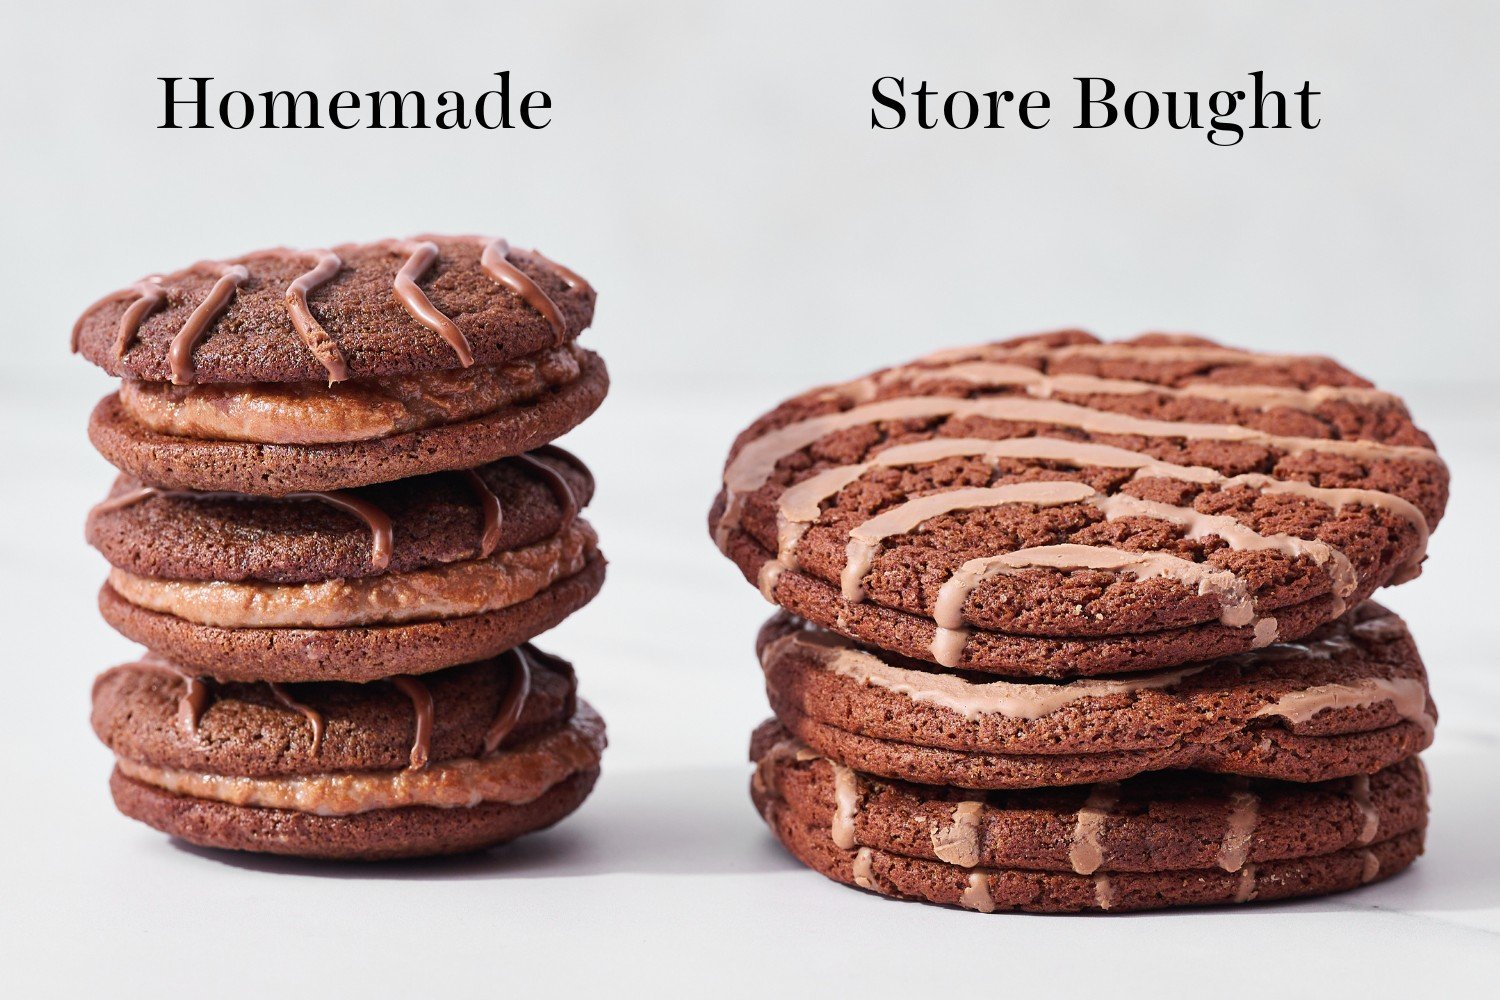 side-by-side stacks of homemade and store bought little debbie's fudge rounds, to compare the size, color and texture of the two.